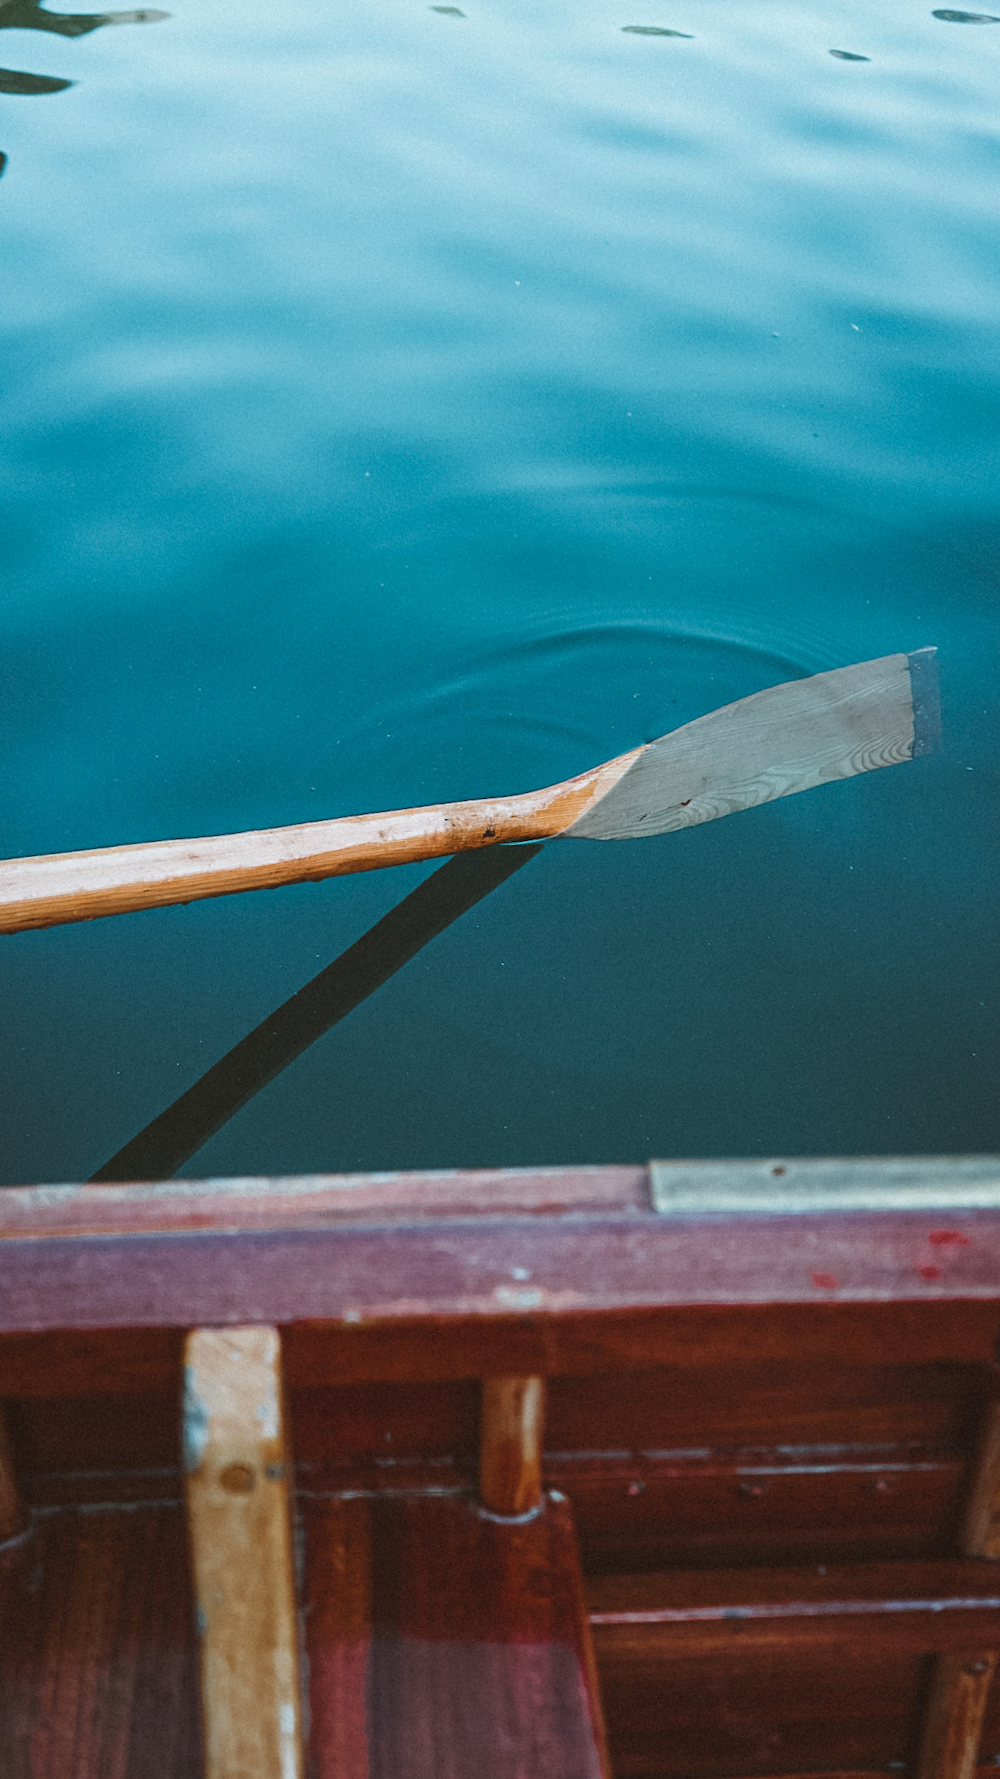 a wooden oar rests on the edge of a boat